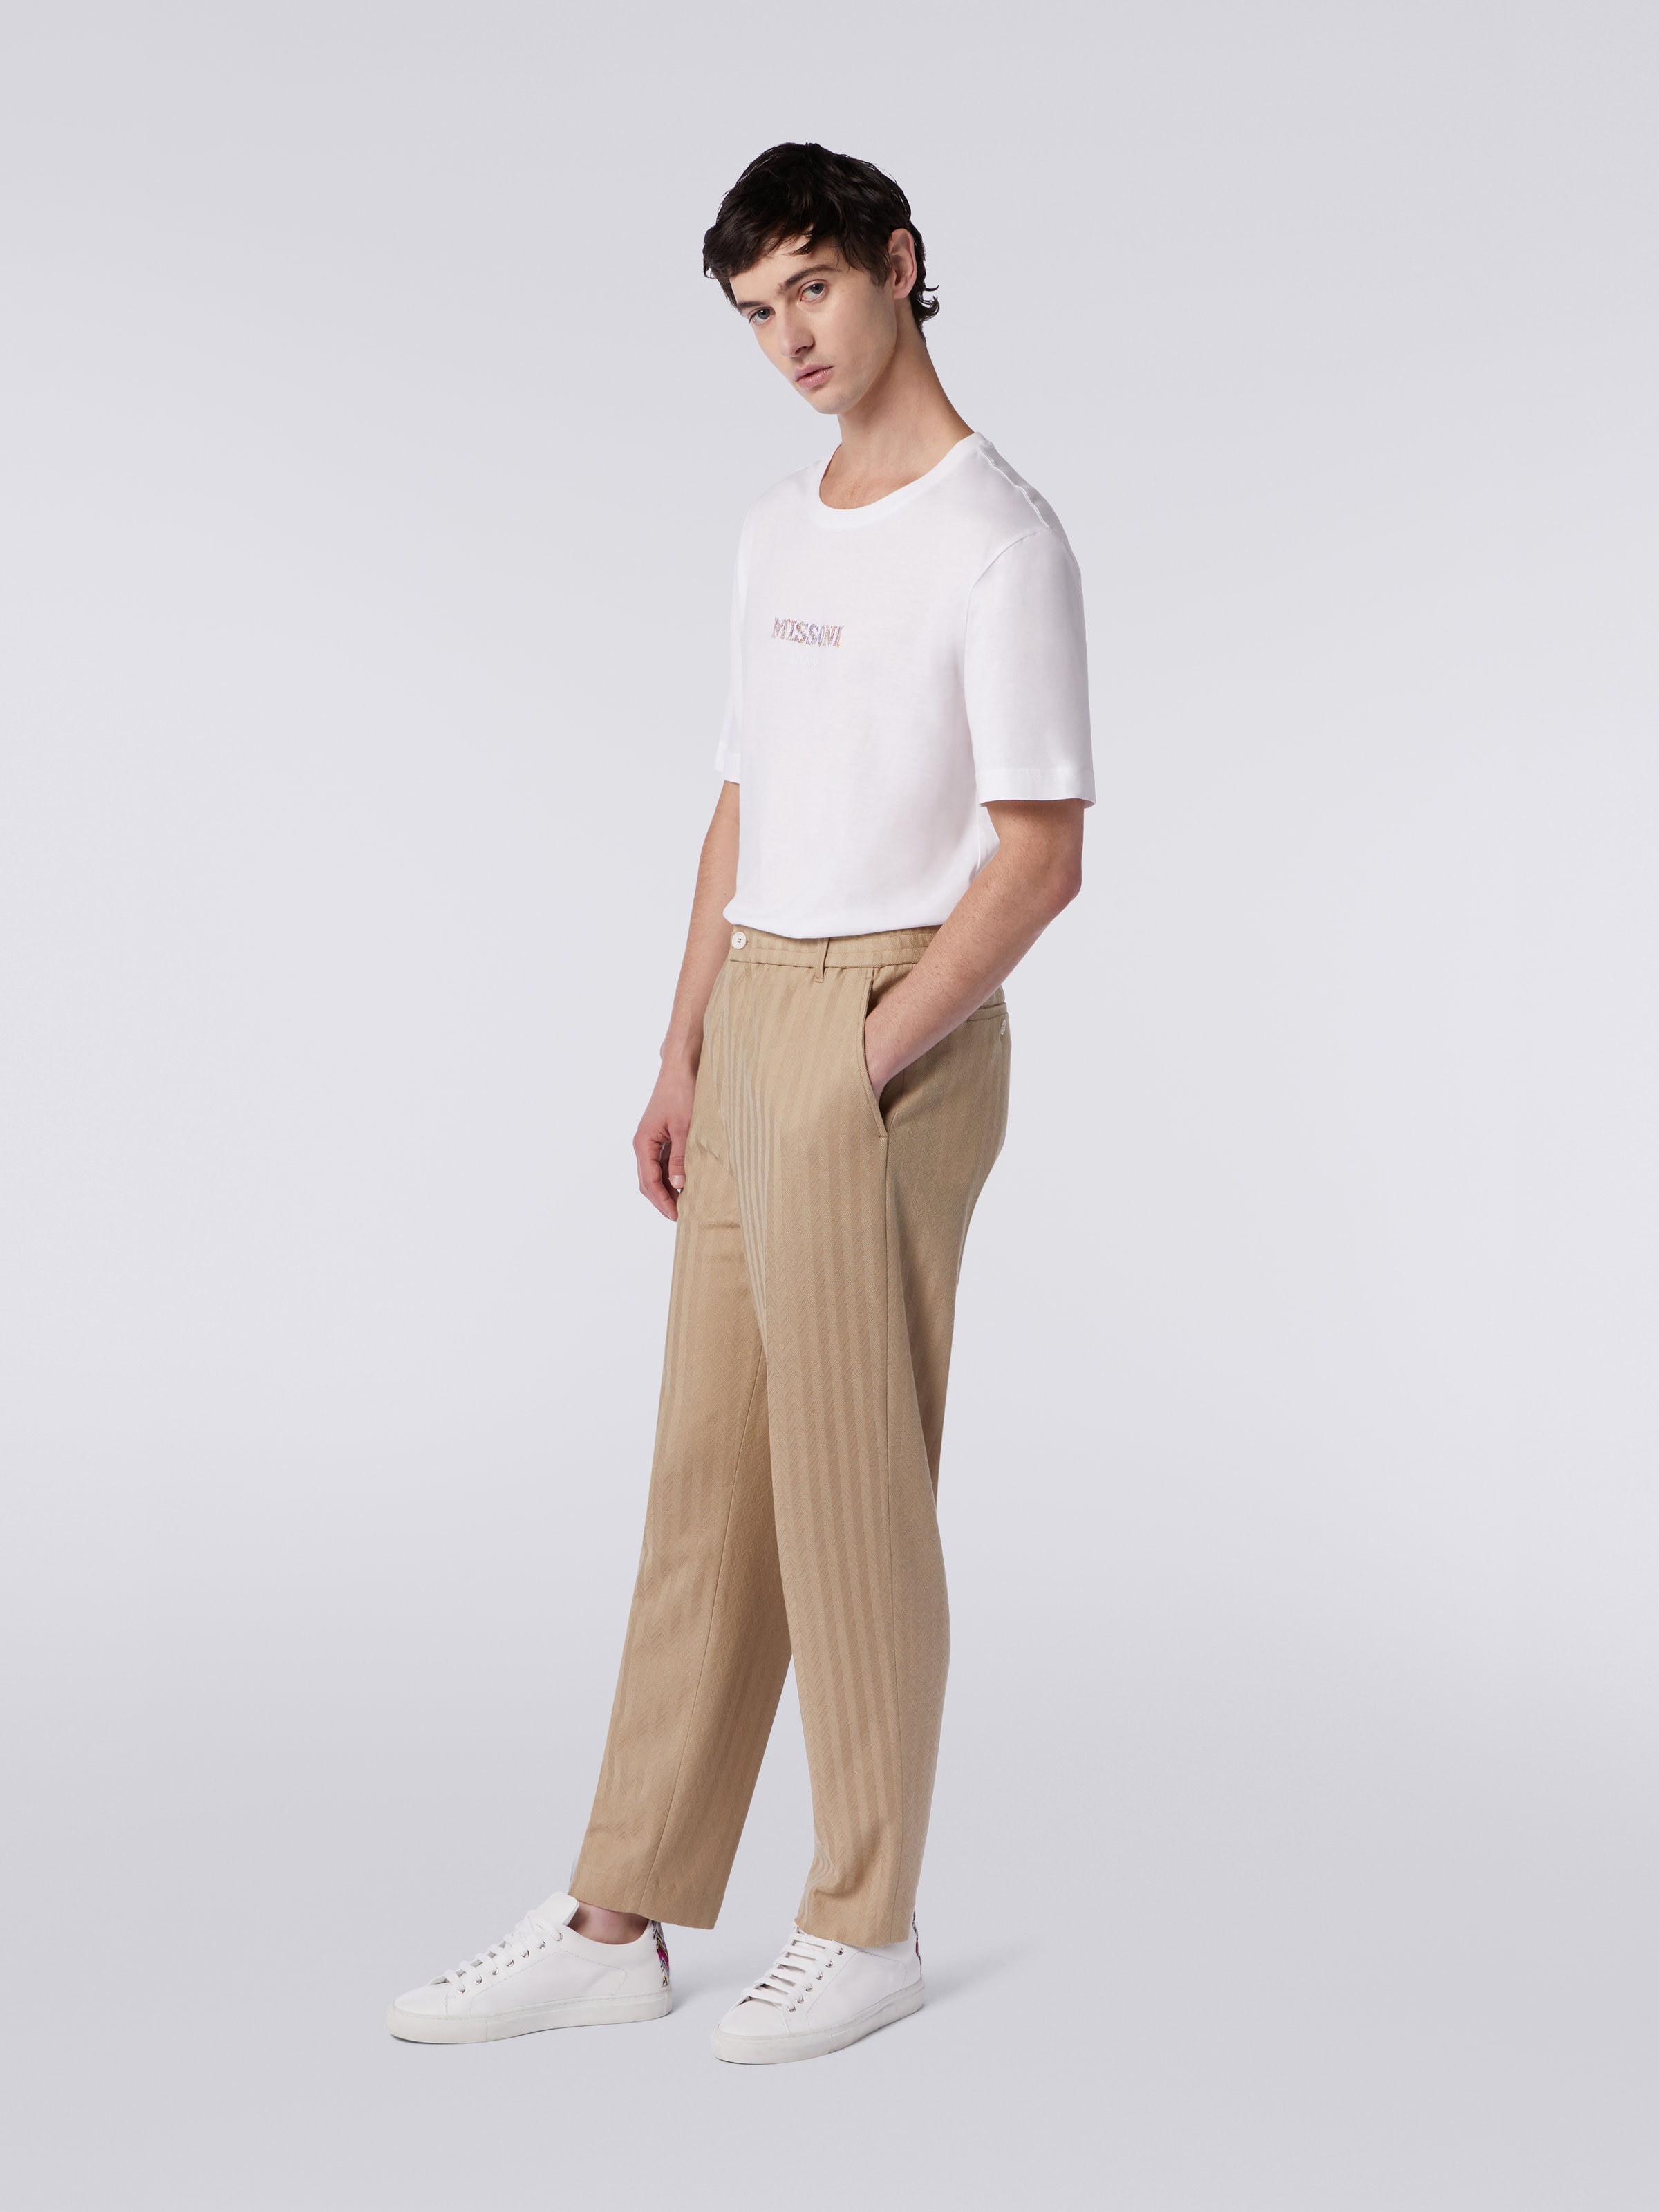 Viscose and cotton chevron trousers with ironed crease, White  - 2